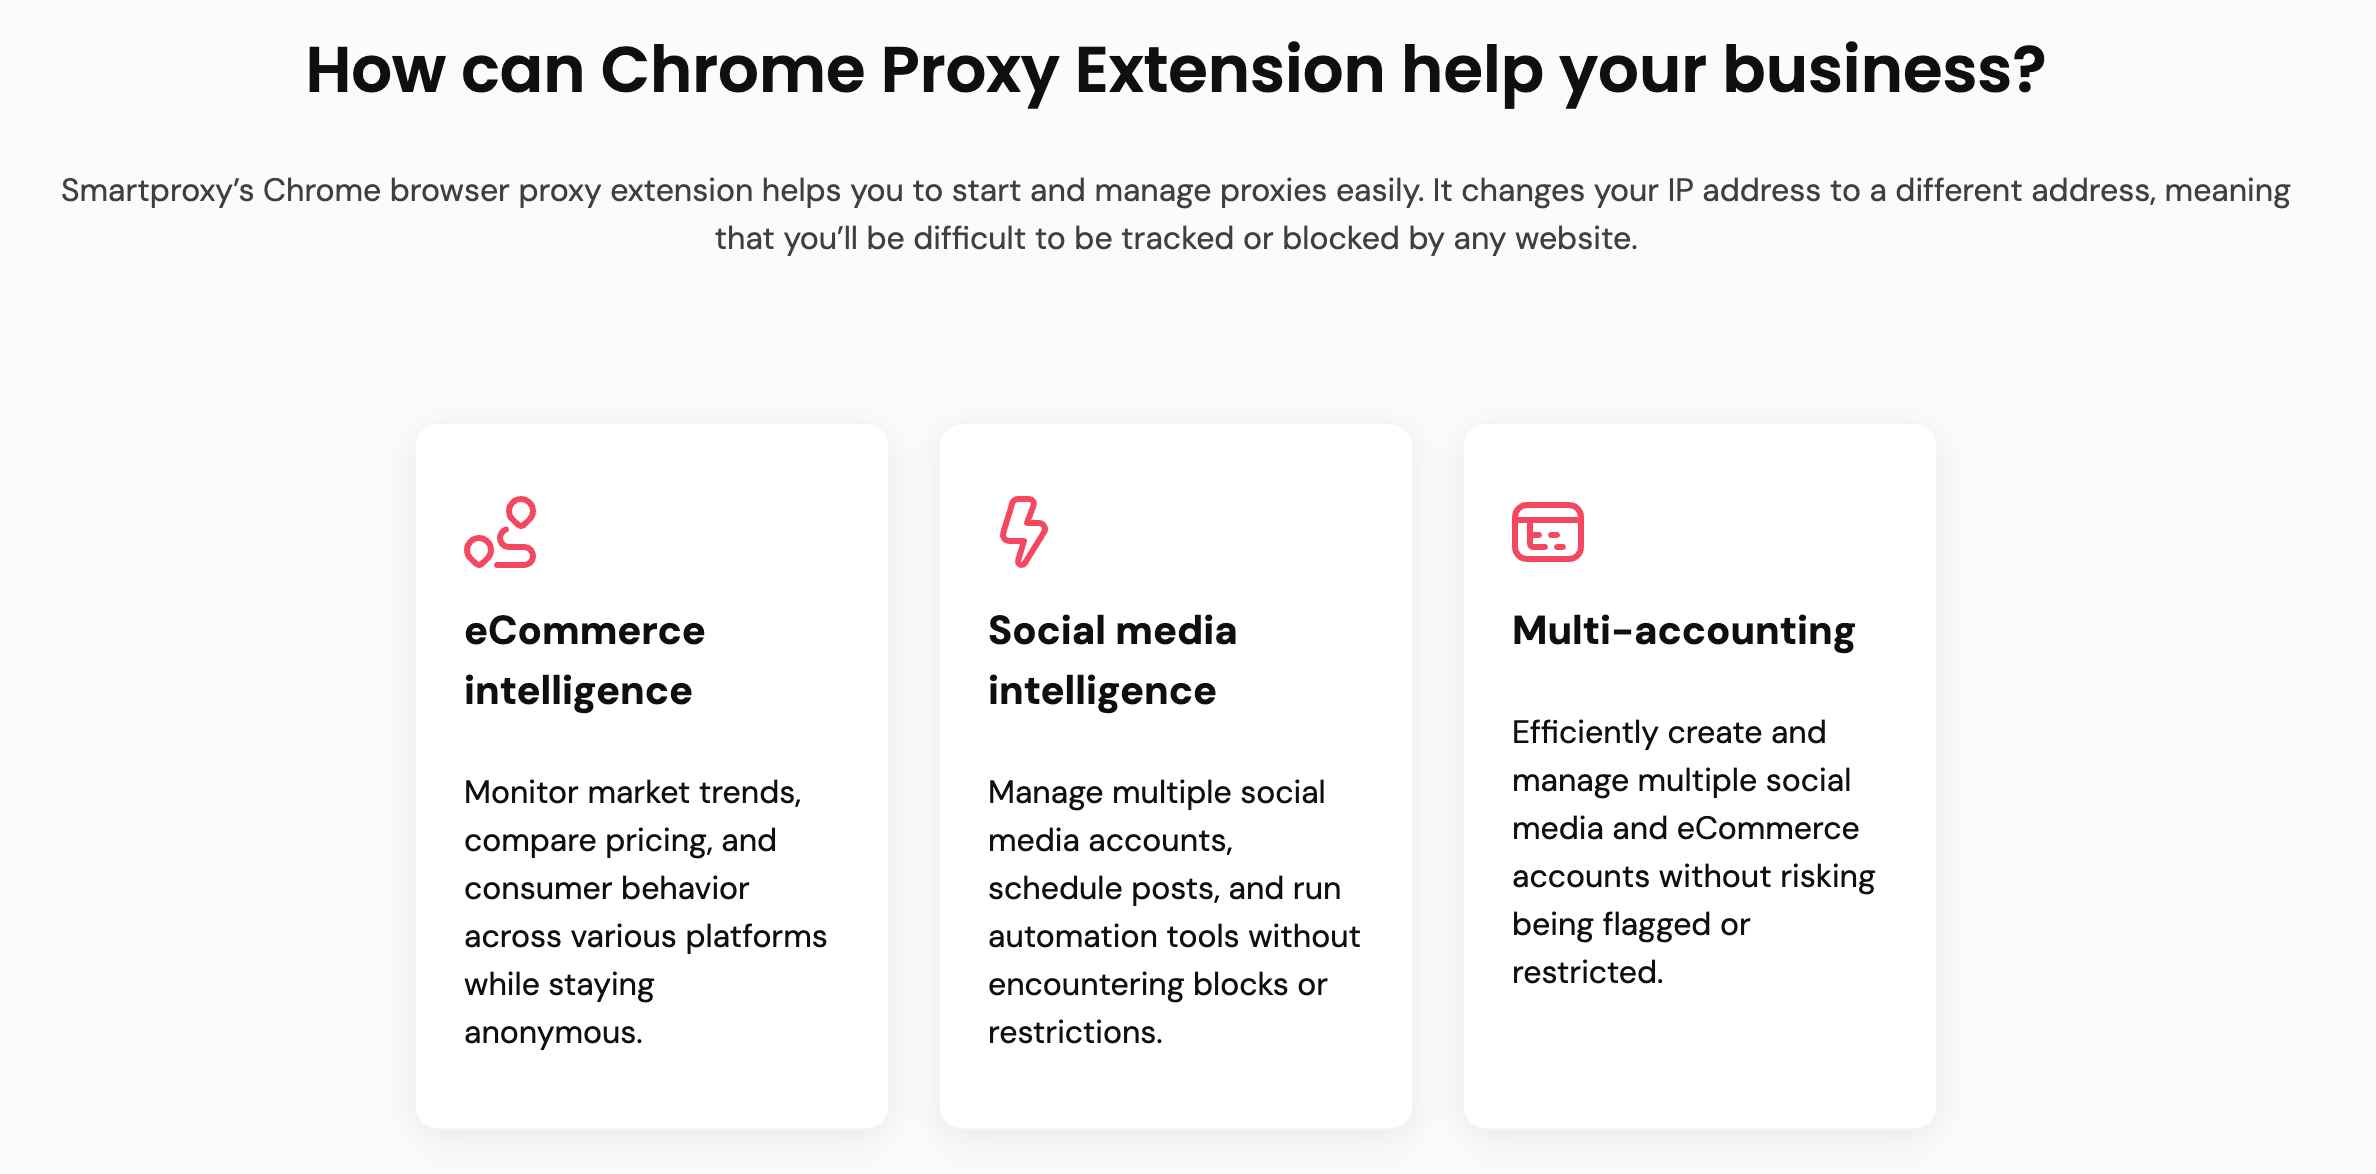 How Can Chrome Proxy Extension Help Your Business